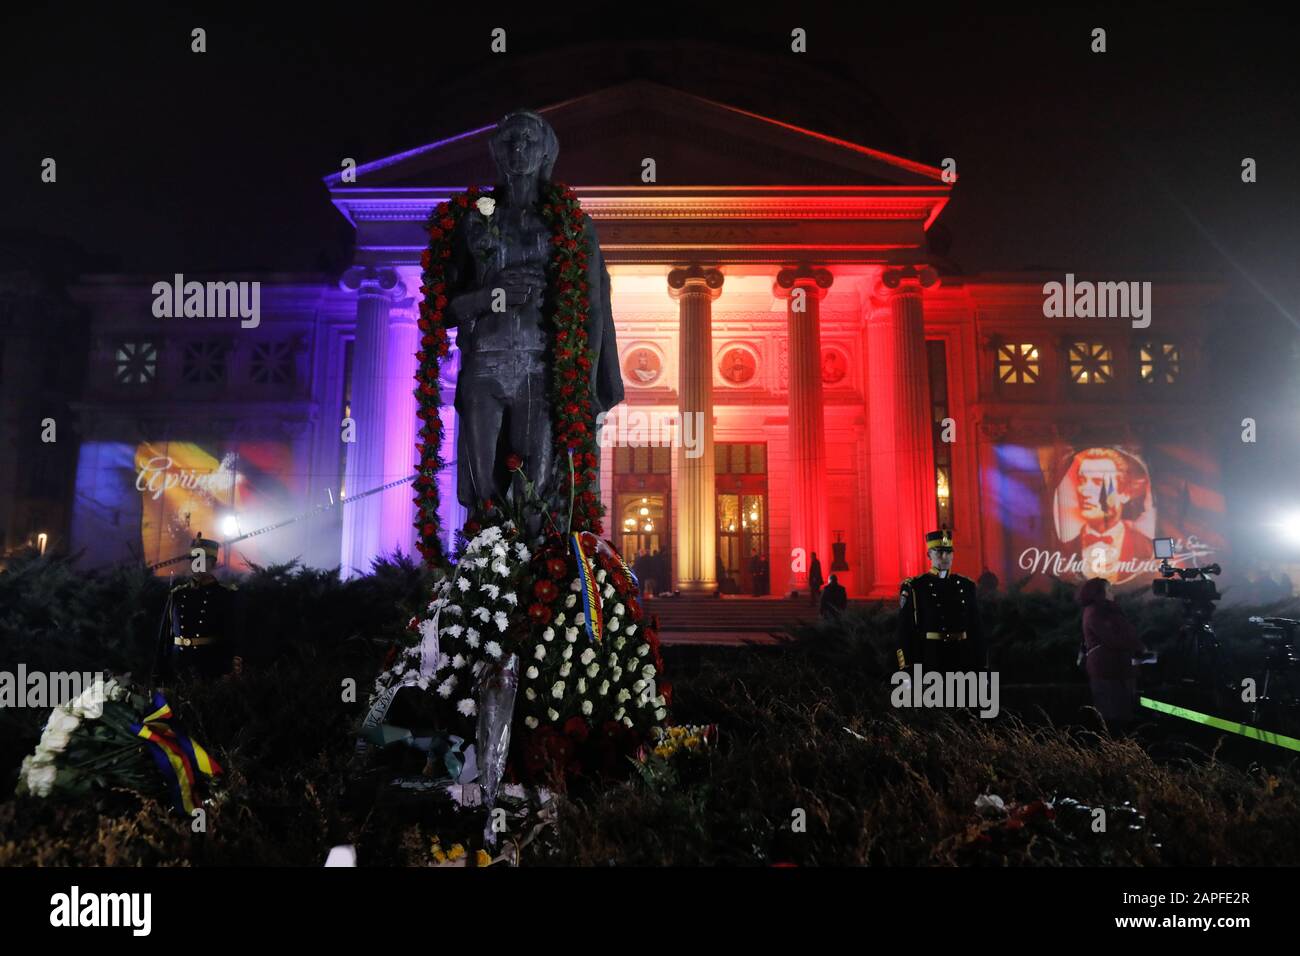 Bucharest, Romania - January 15, 2020: Romanian flag projected on the Athenaeum and Mihai Eminescu image (his statue in the foreground) during the poe Stock Photo